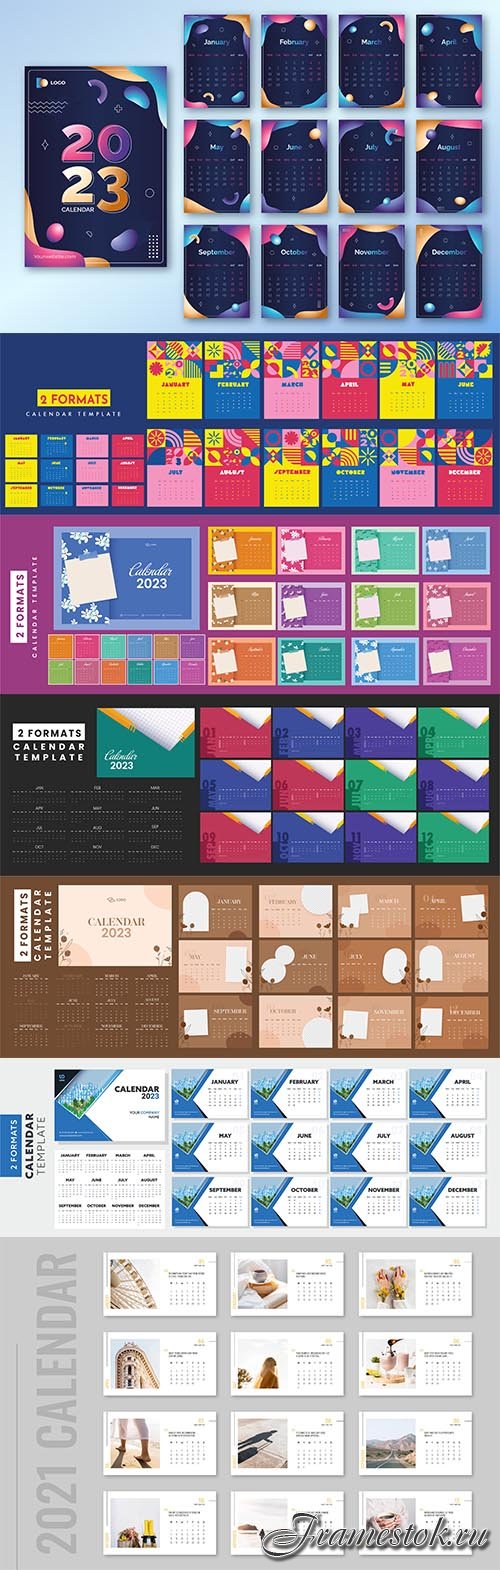 2 formats complete set of 12 month 2023 calendar template layout for publishing